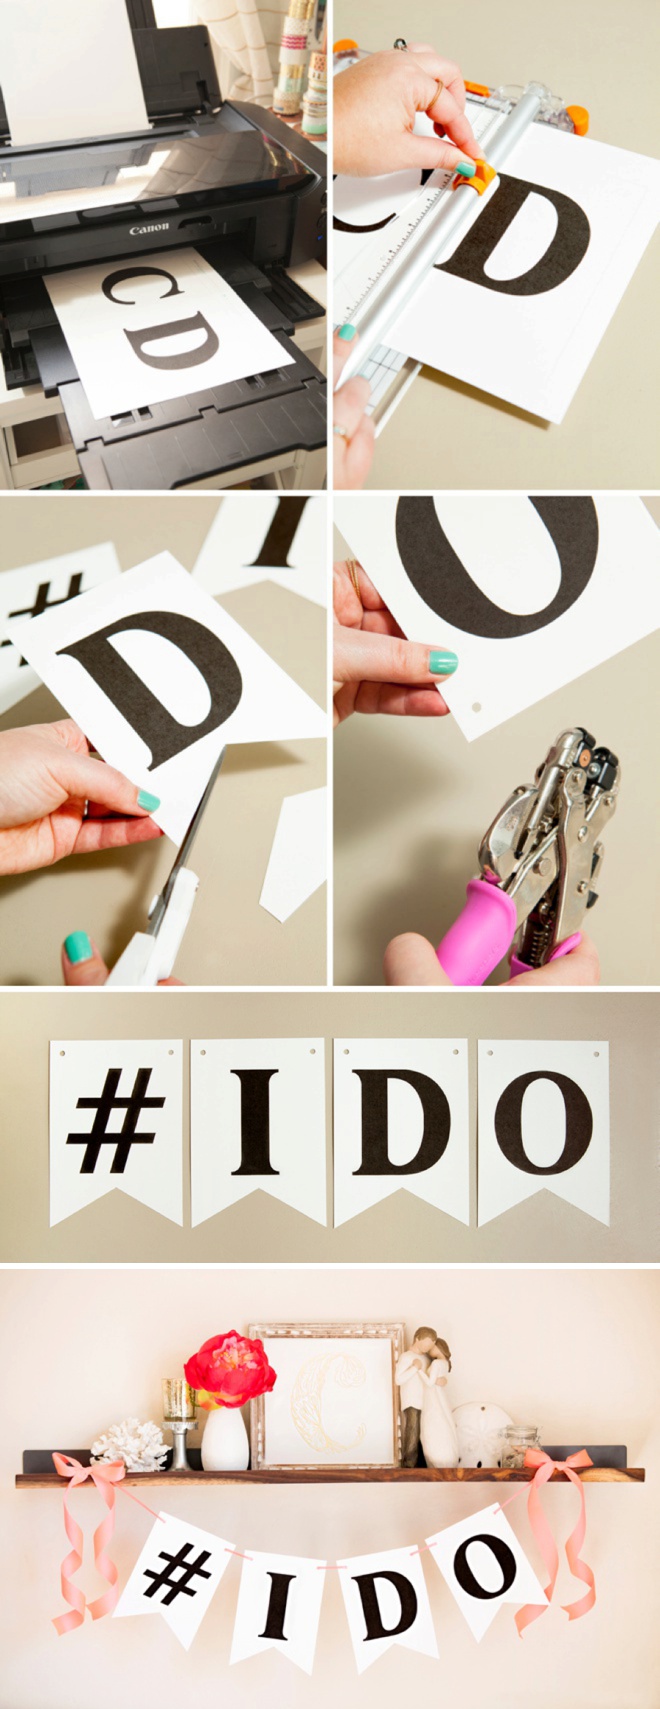 Free Printable Alphabet And Number Banner Adorable